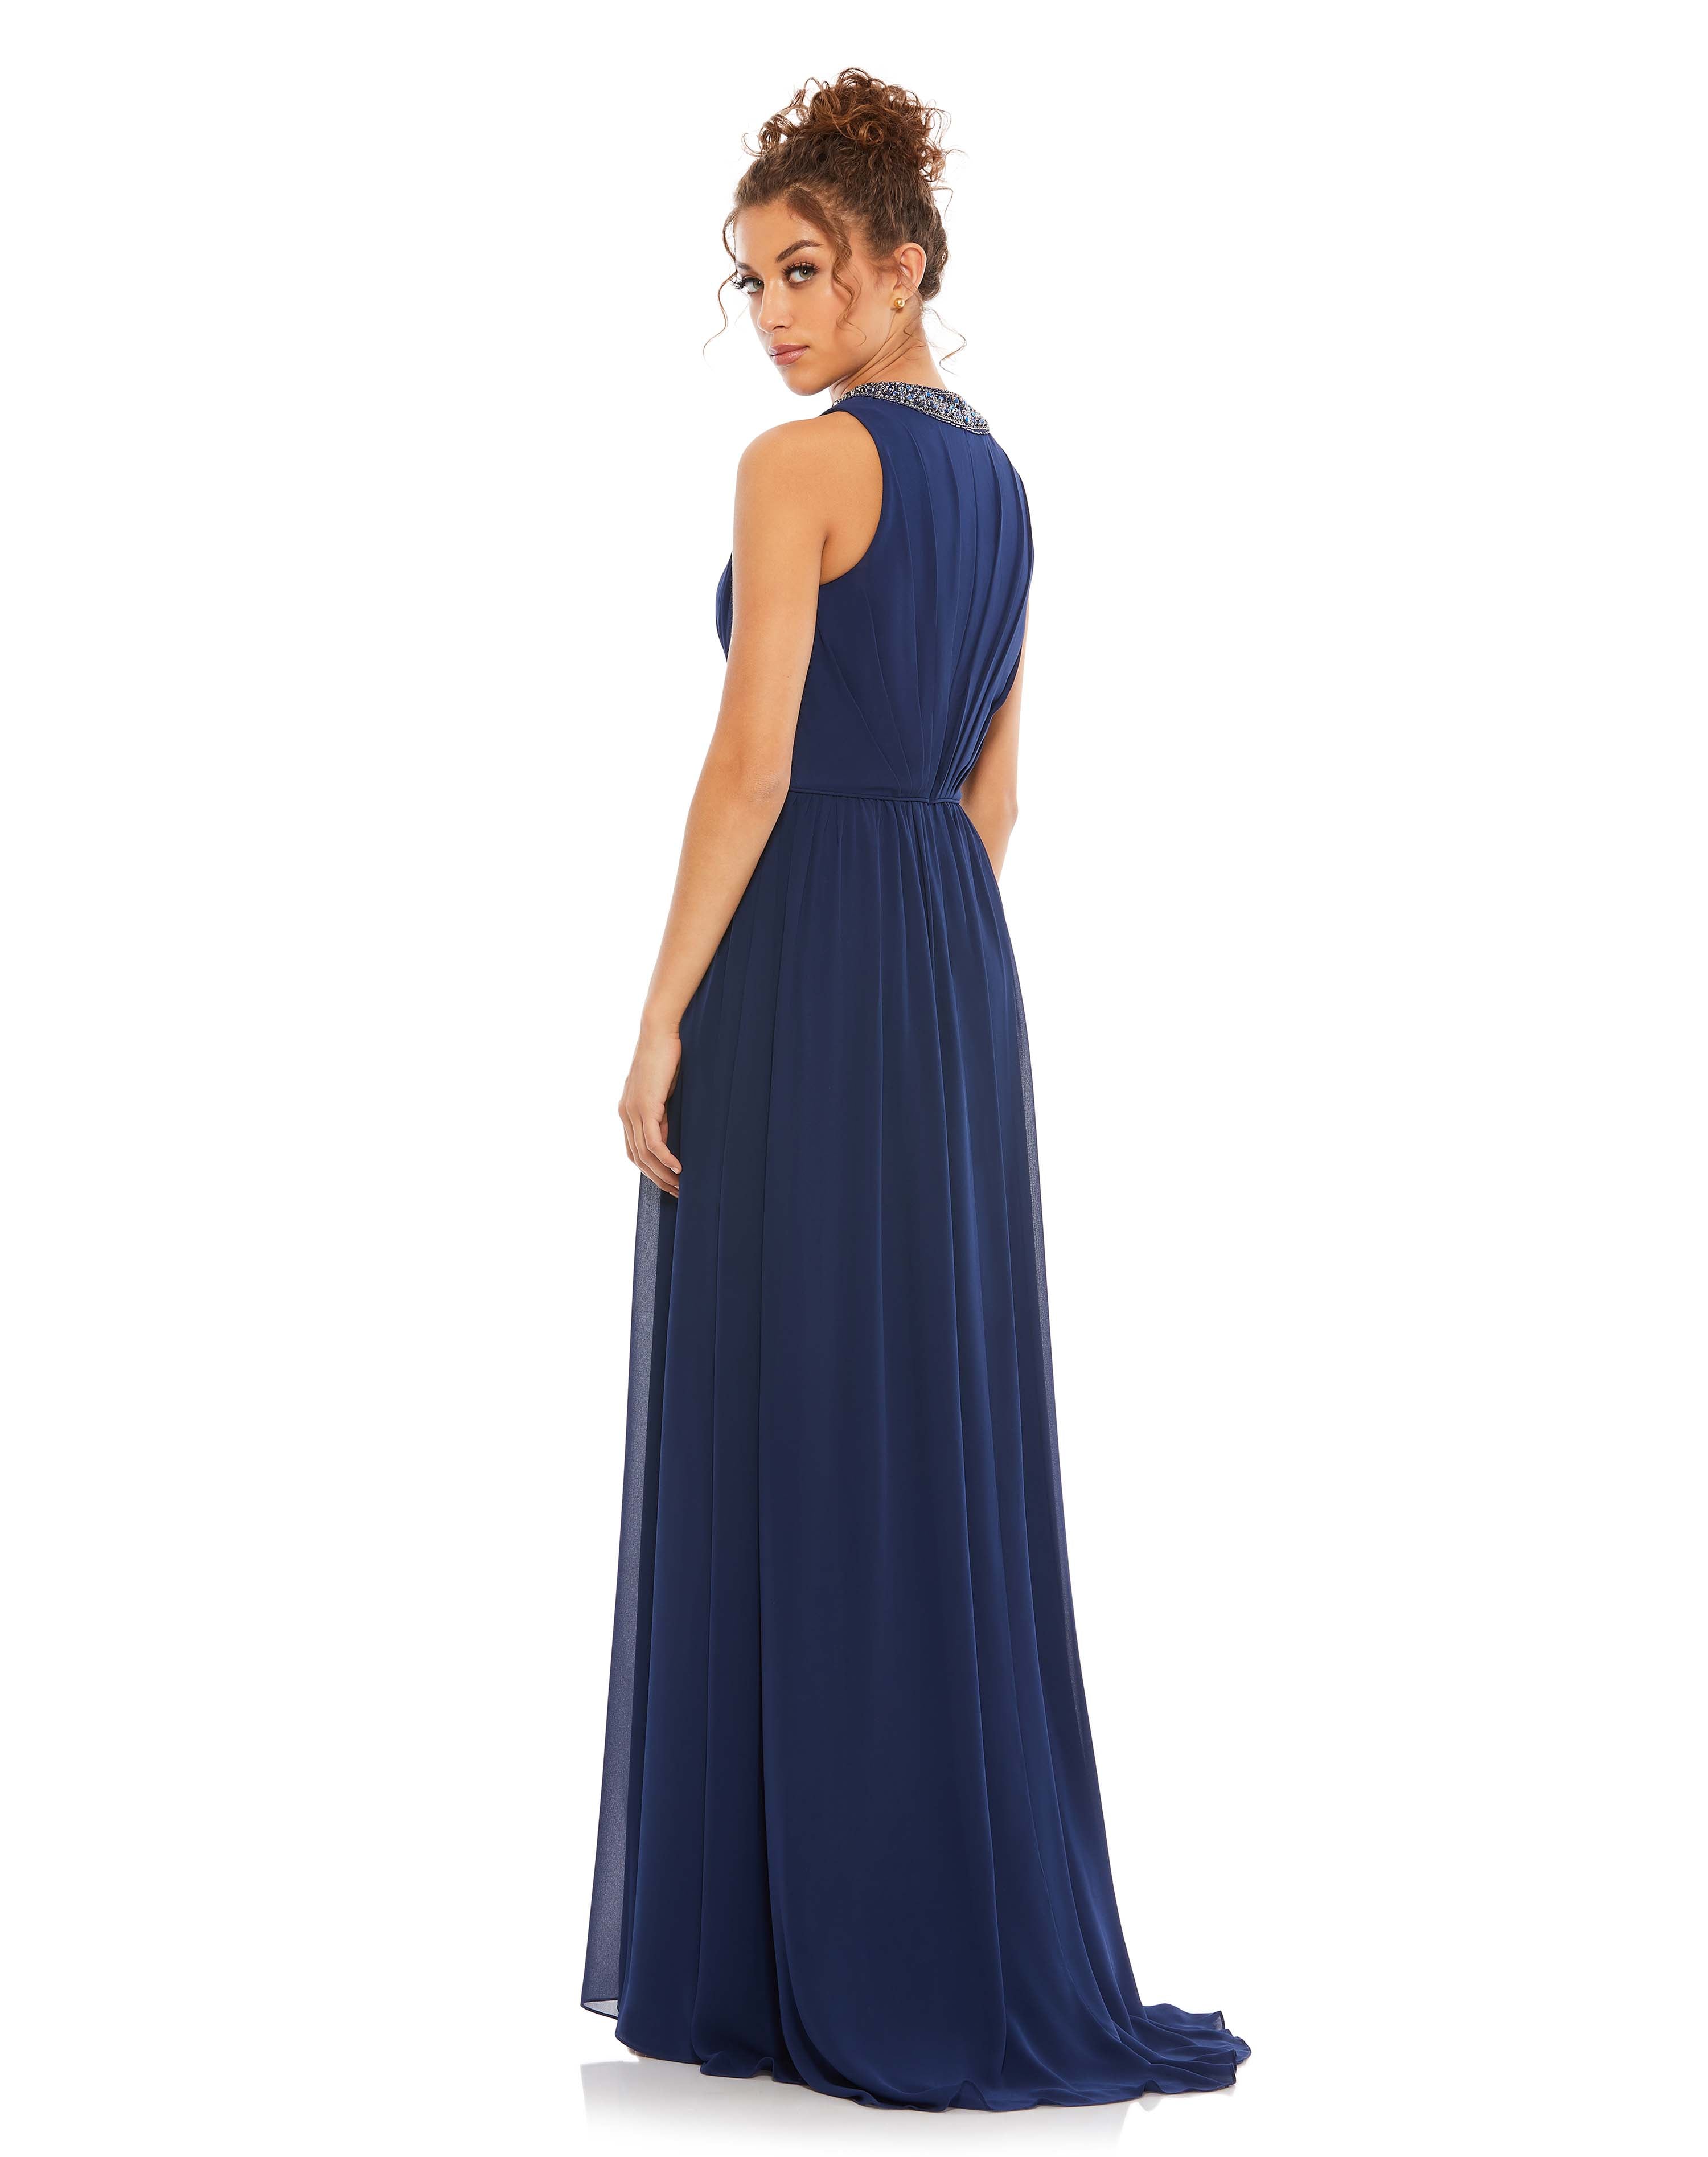 Bejeweled Neckline Pleated Chiffon Gown